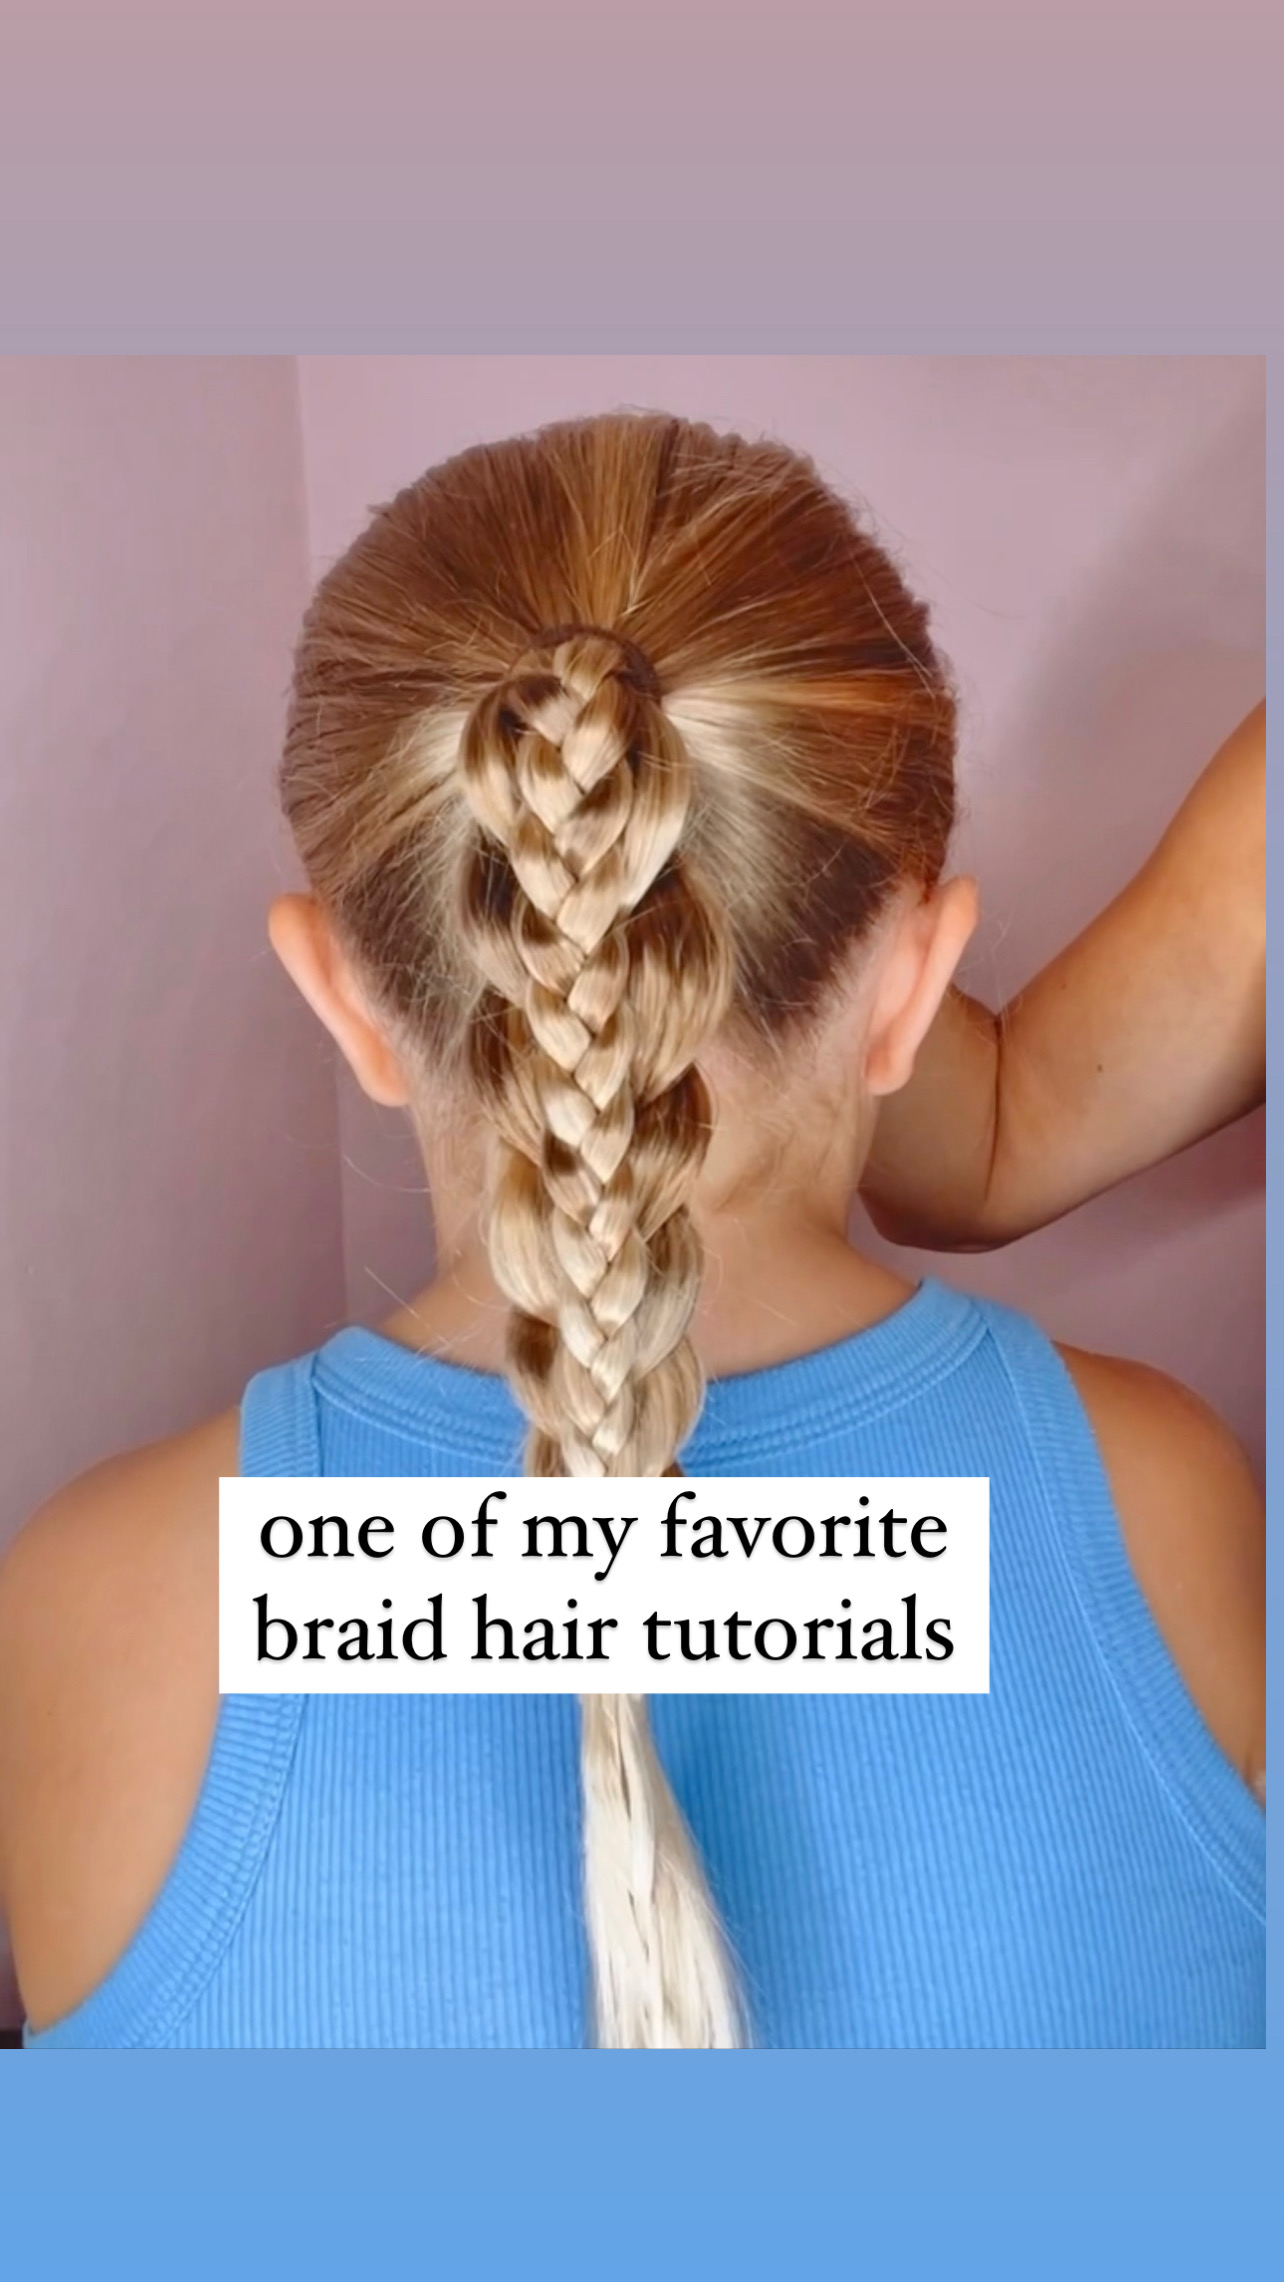 How to: Simple Kids Braid Styles - YouTube